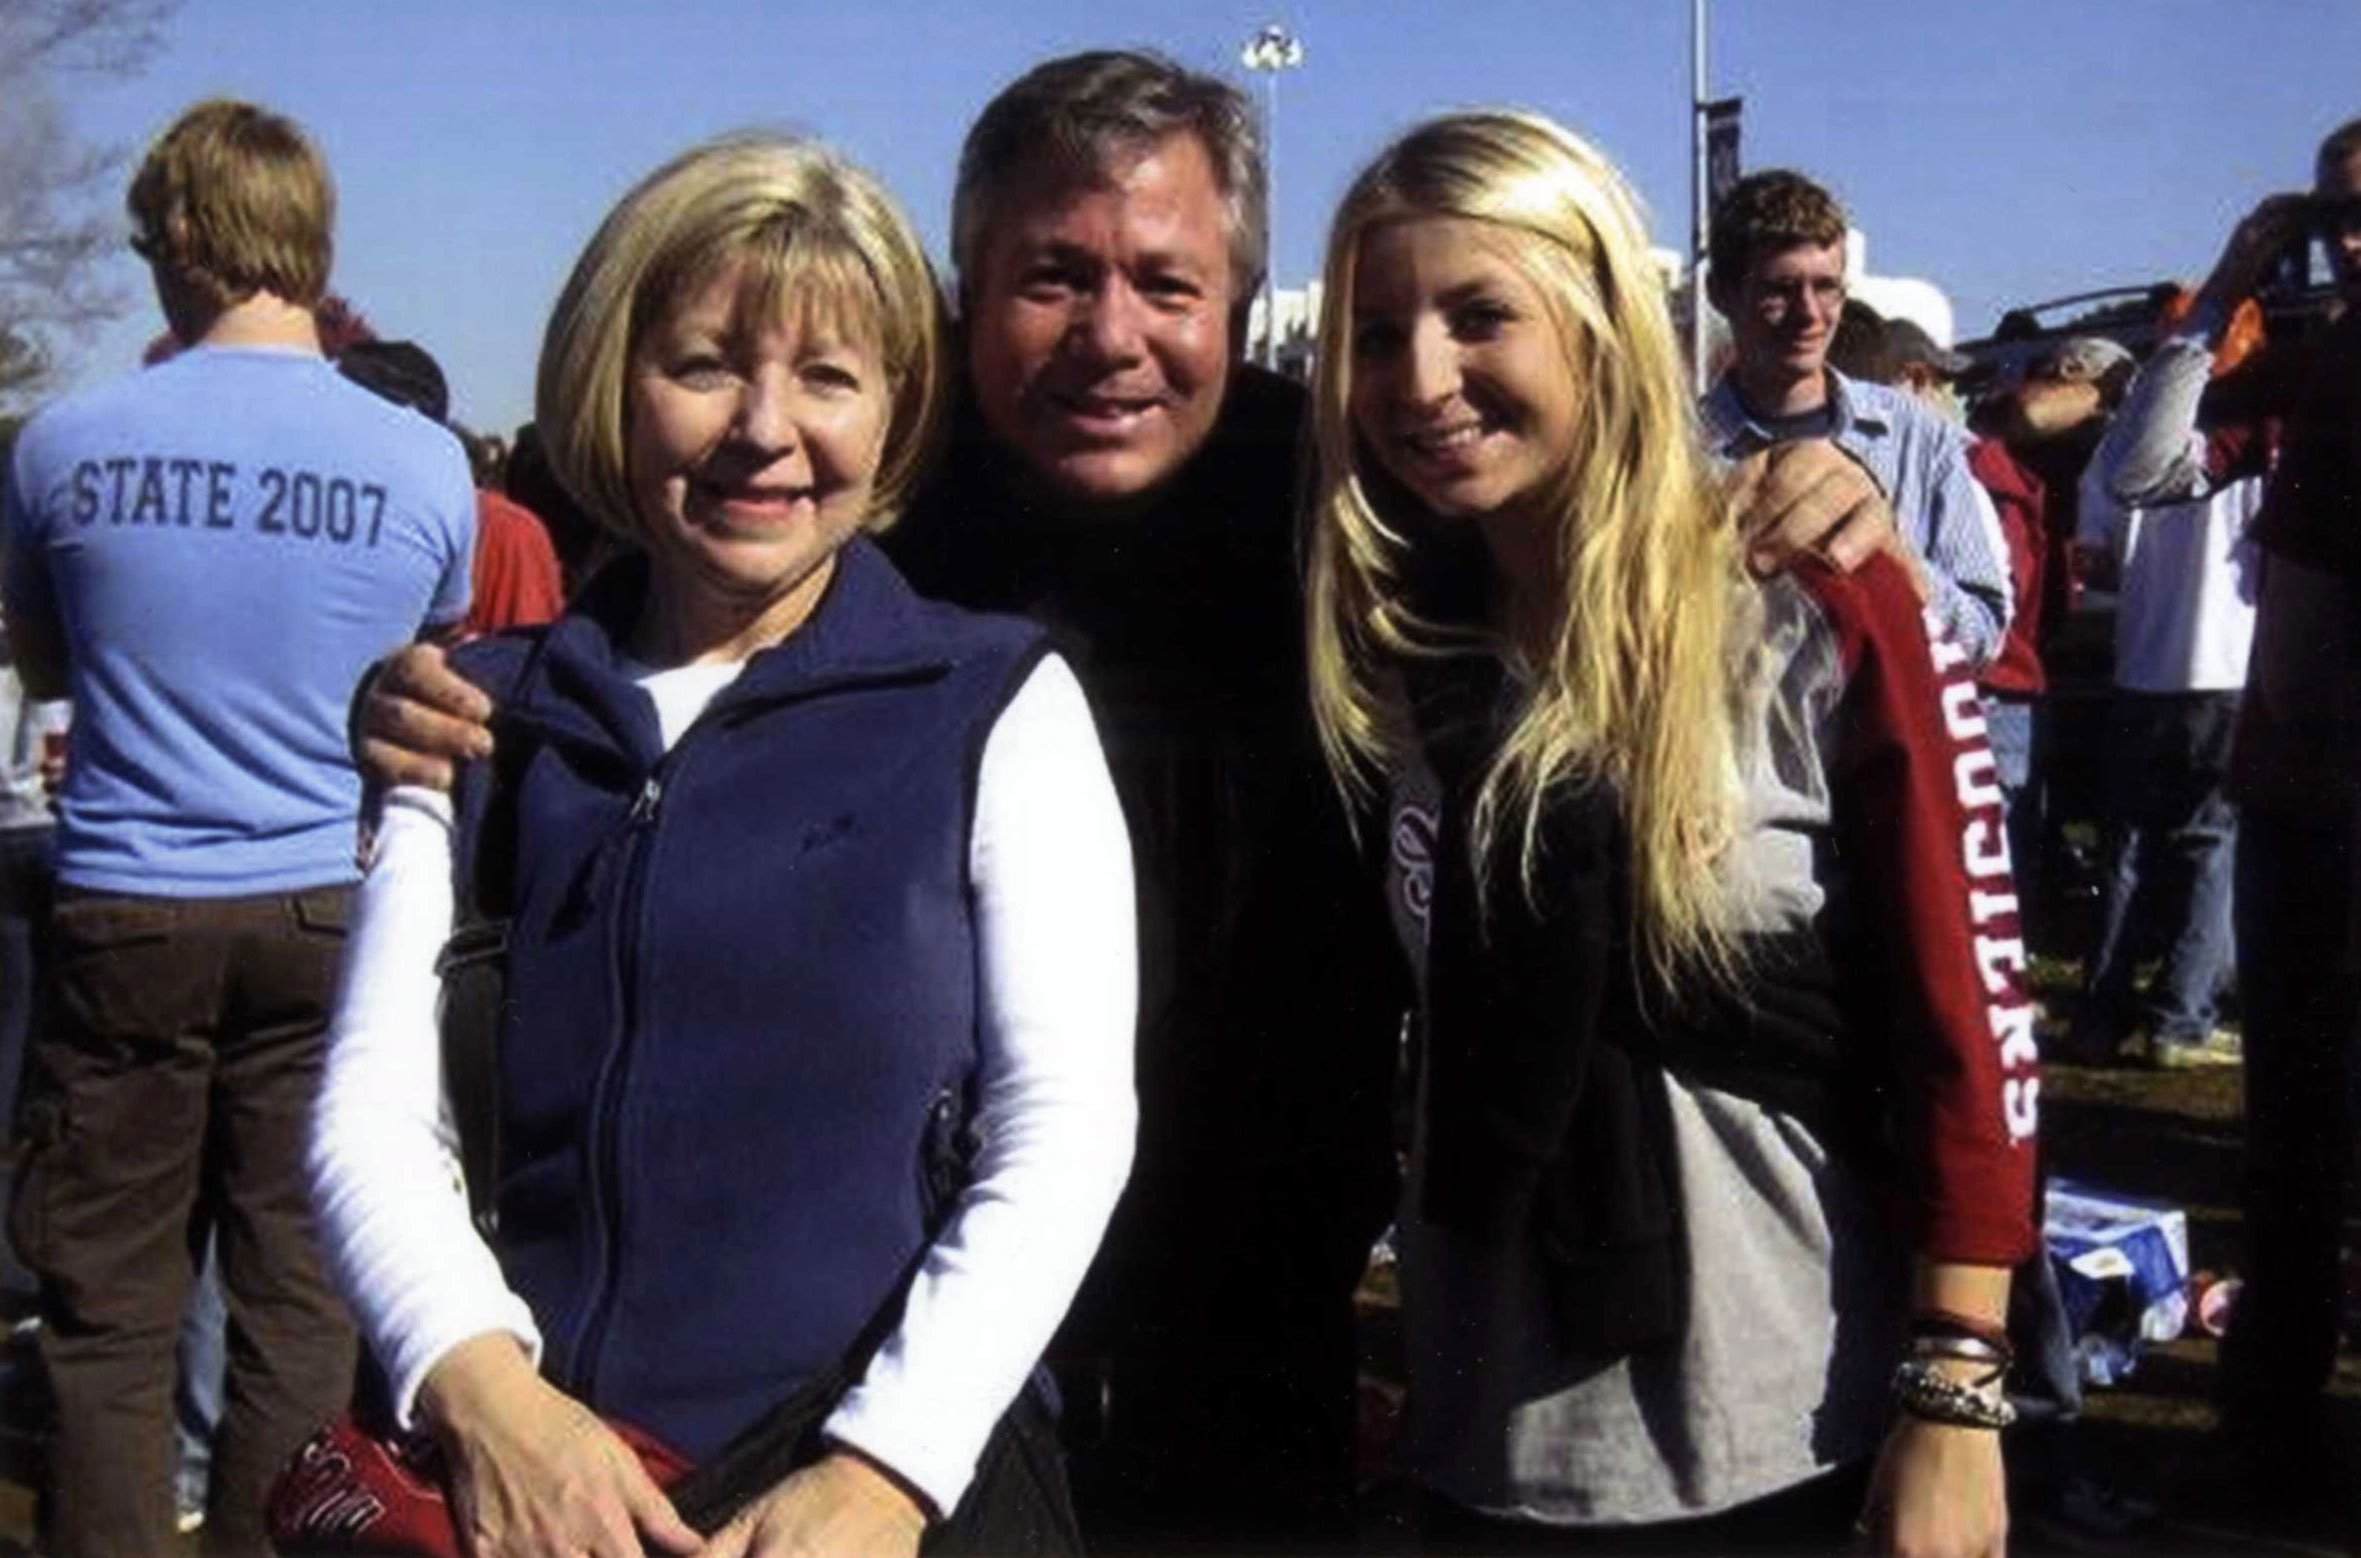 PHOTO: Charlene and Rob Spierer with their daughter Lauren.